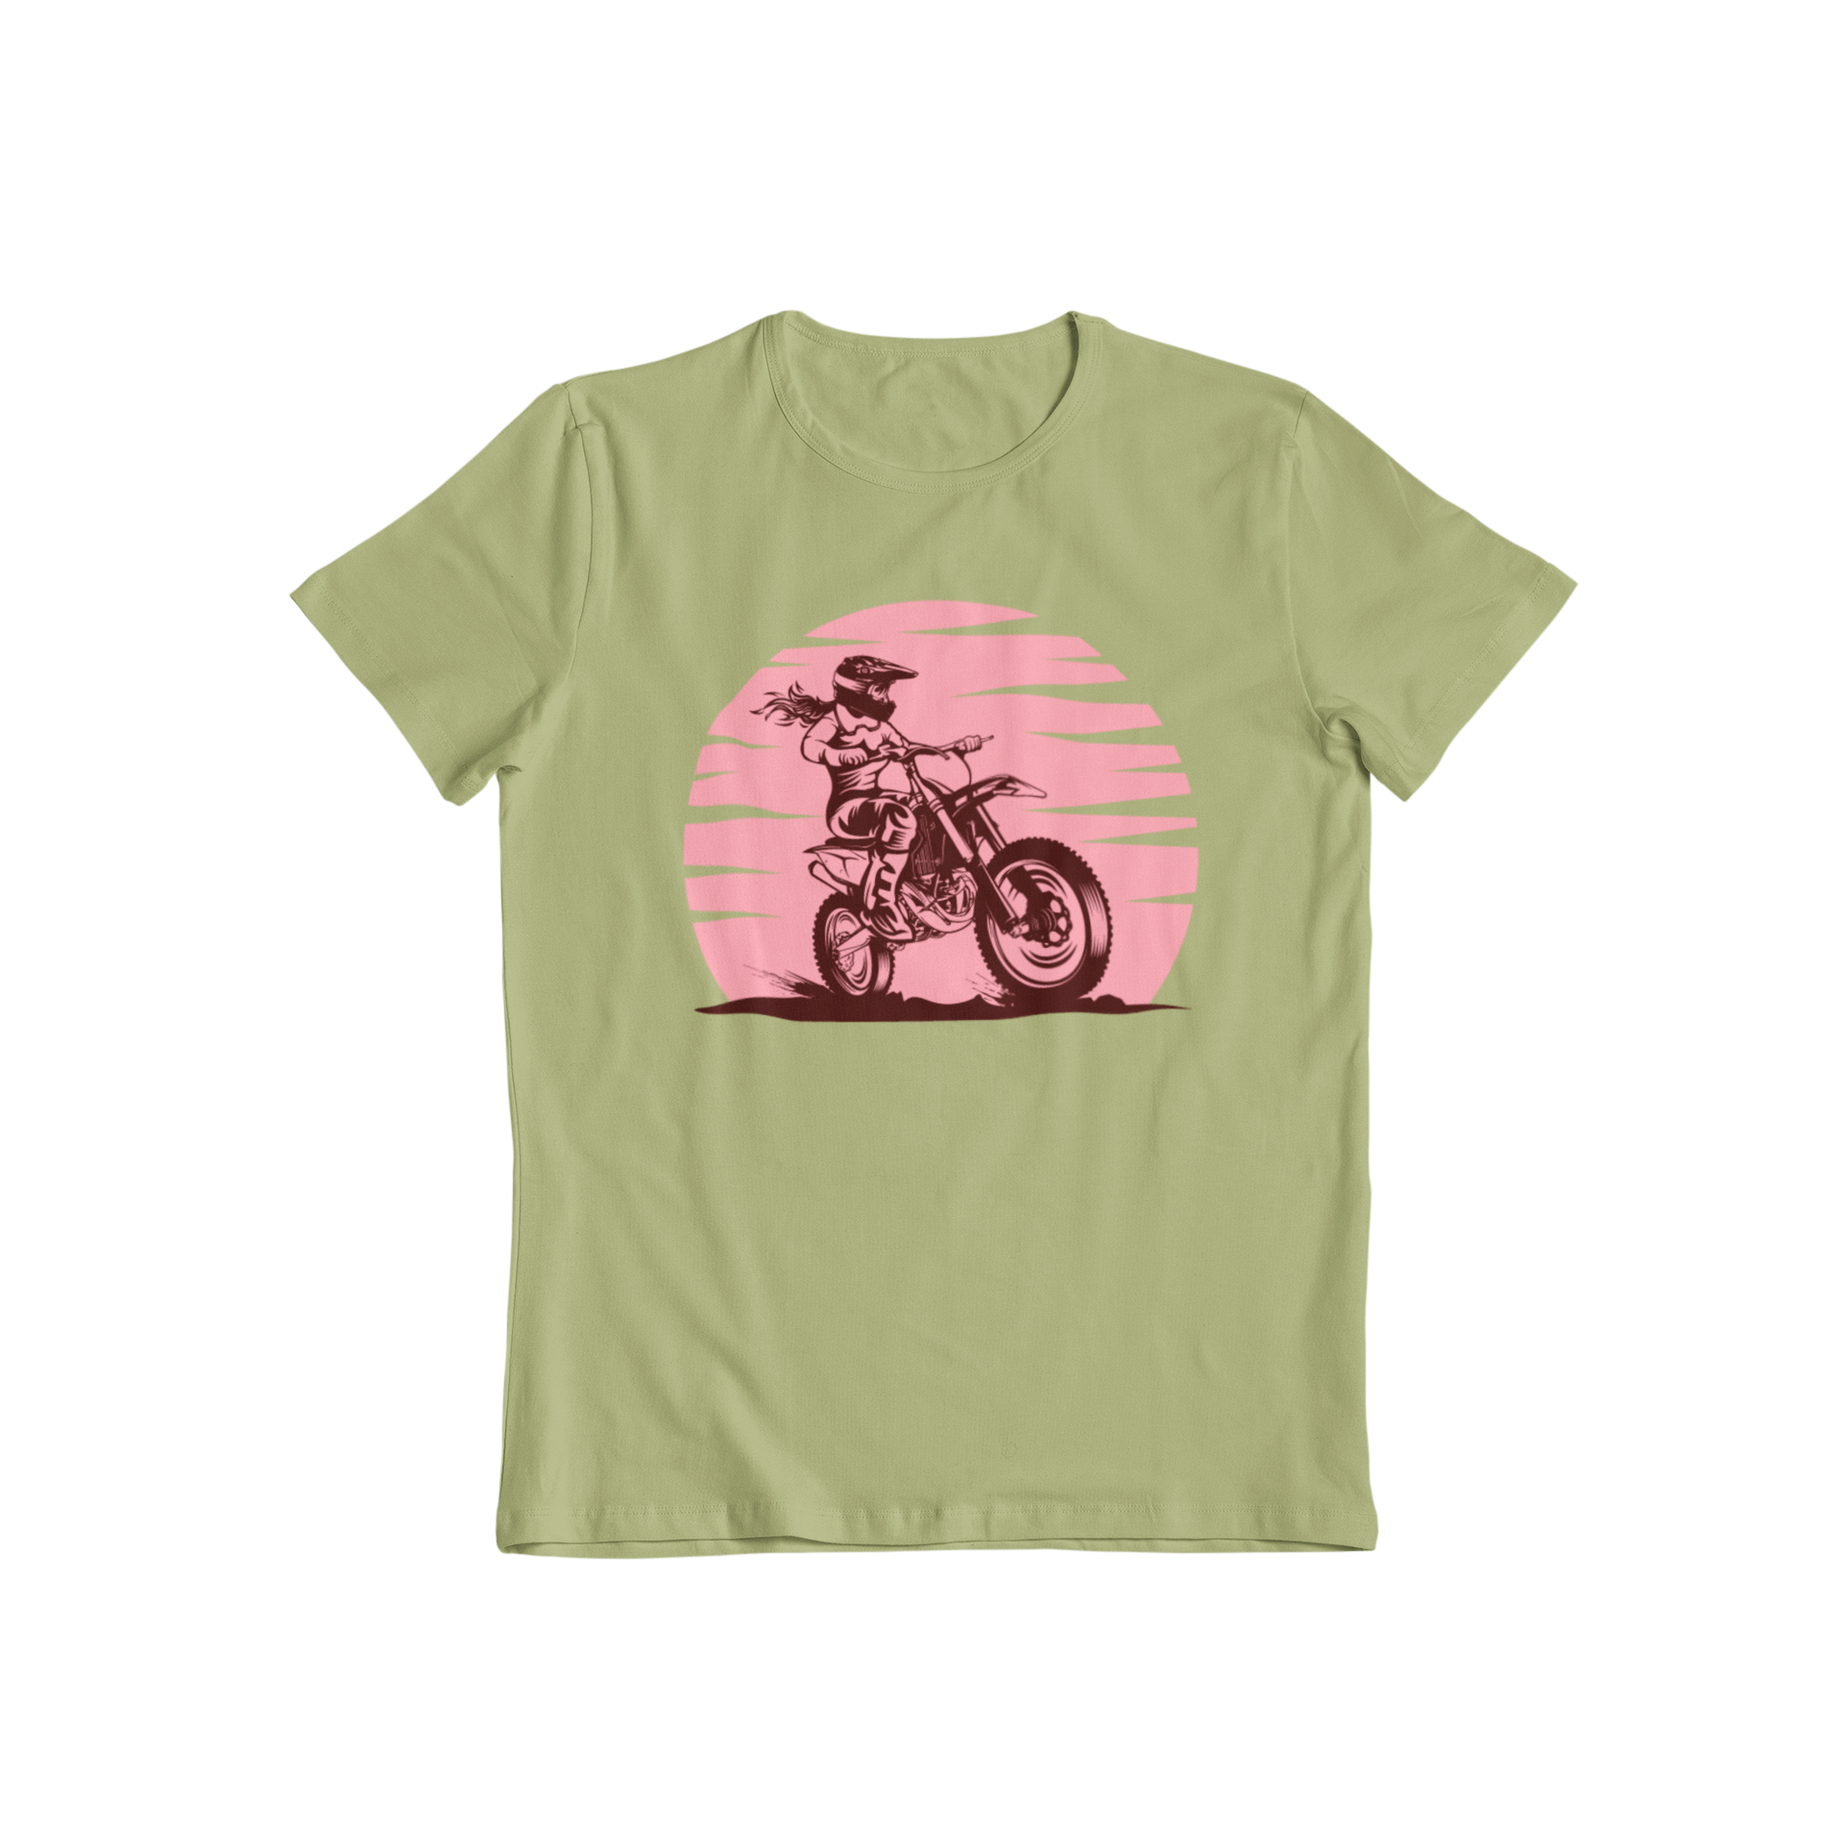 Are you a female Moto X lover? Then you'll love our tshirt from teevolution. Featuring a woman riding a Moto X bike in front of a beautiful sunset, this t-shirt is perfect for anyone who loves adventure and style. Get yours today and show off your passion for Moto X!